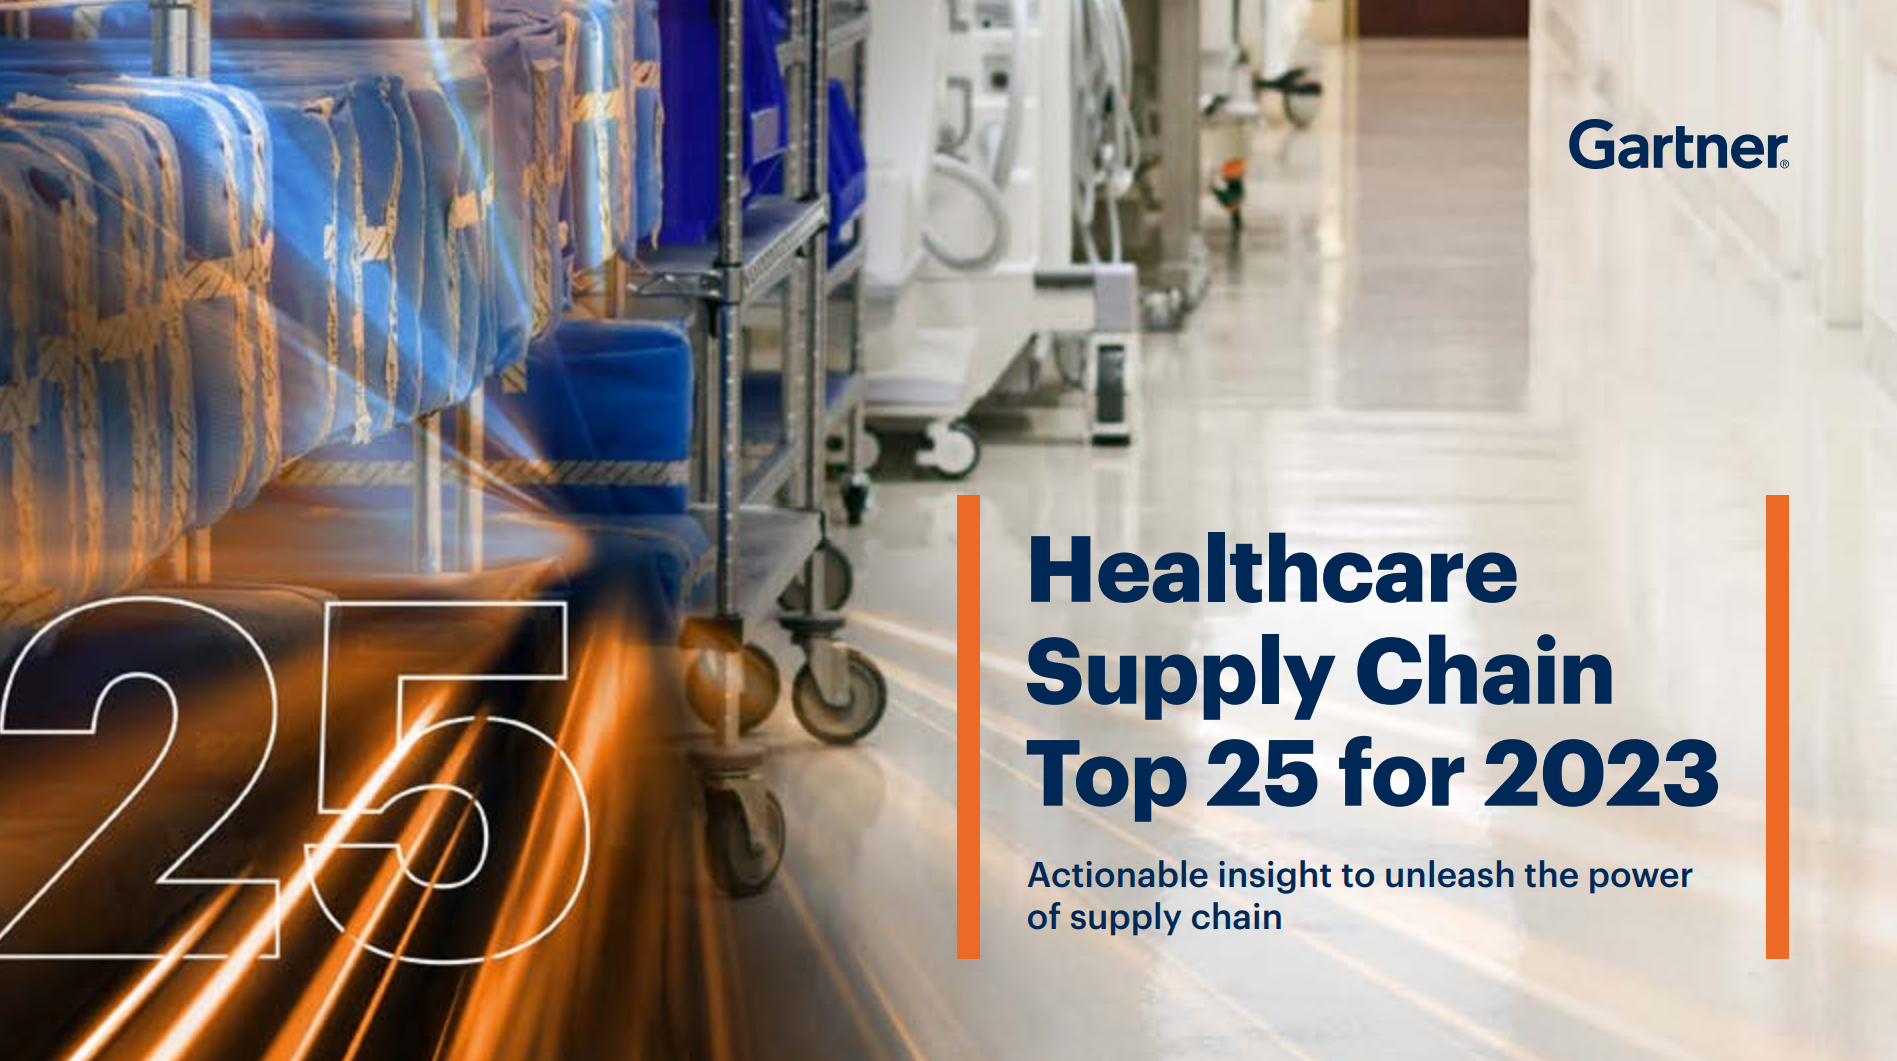 Gartner Releases Healthcare Supply Chain Top 25 for 2023: Cleveland Clinic Rated #1